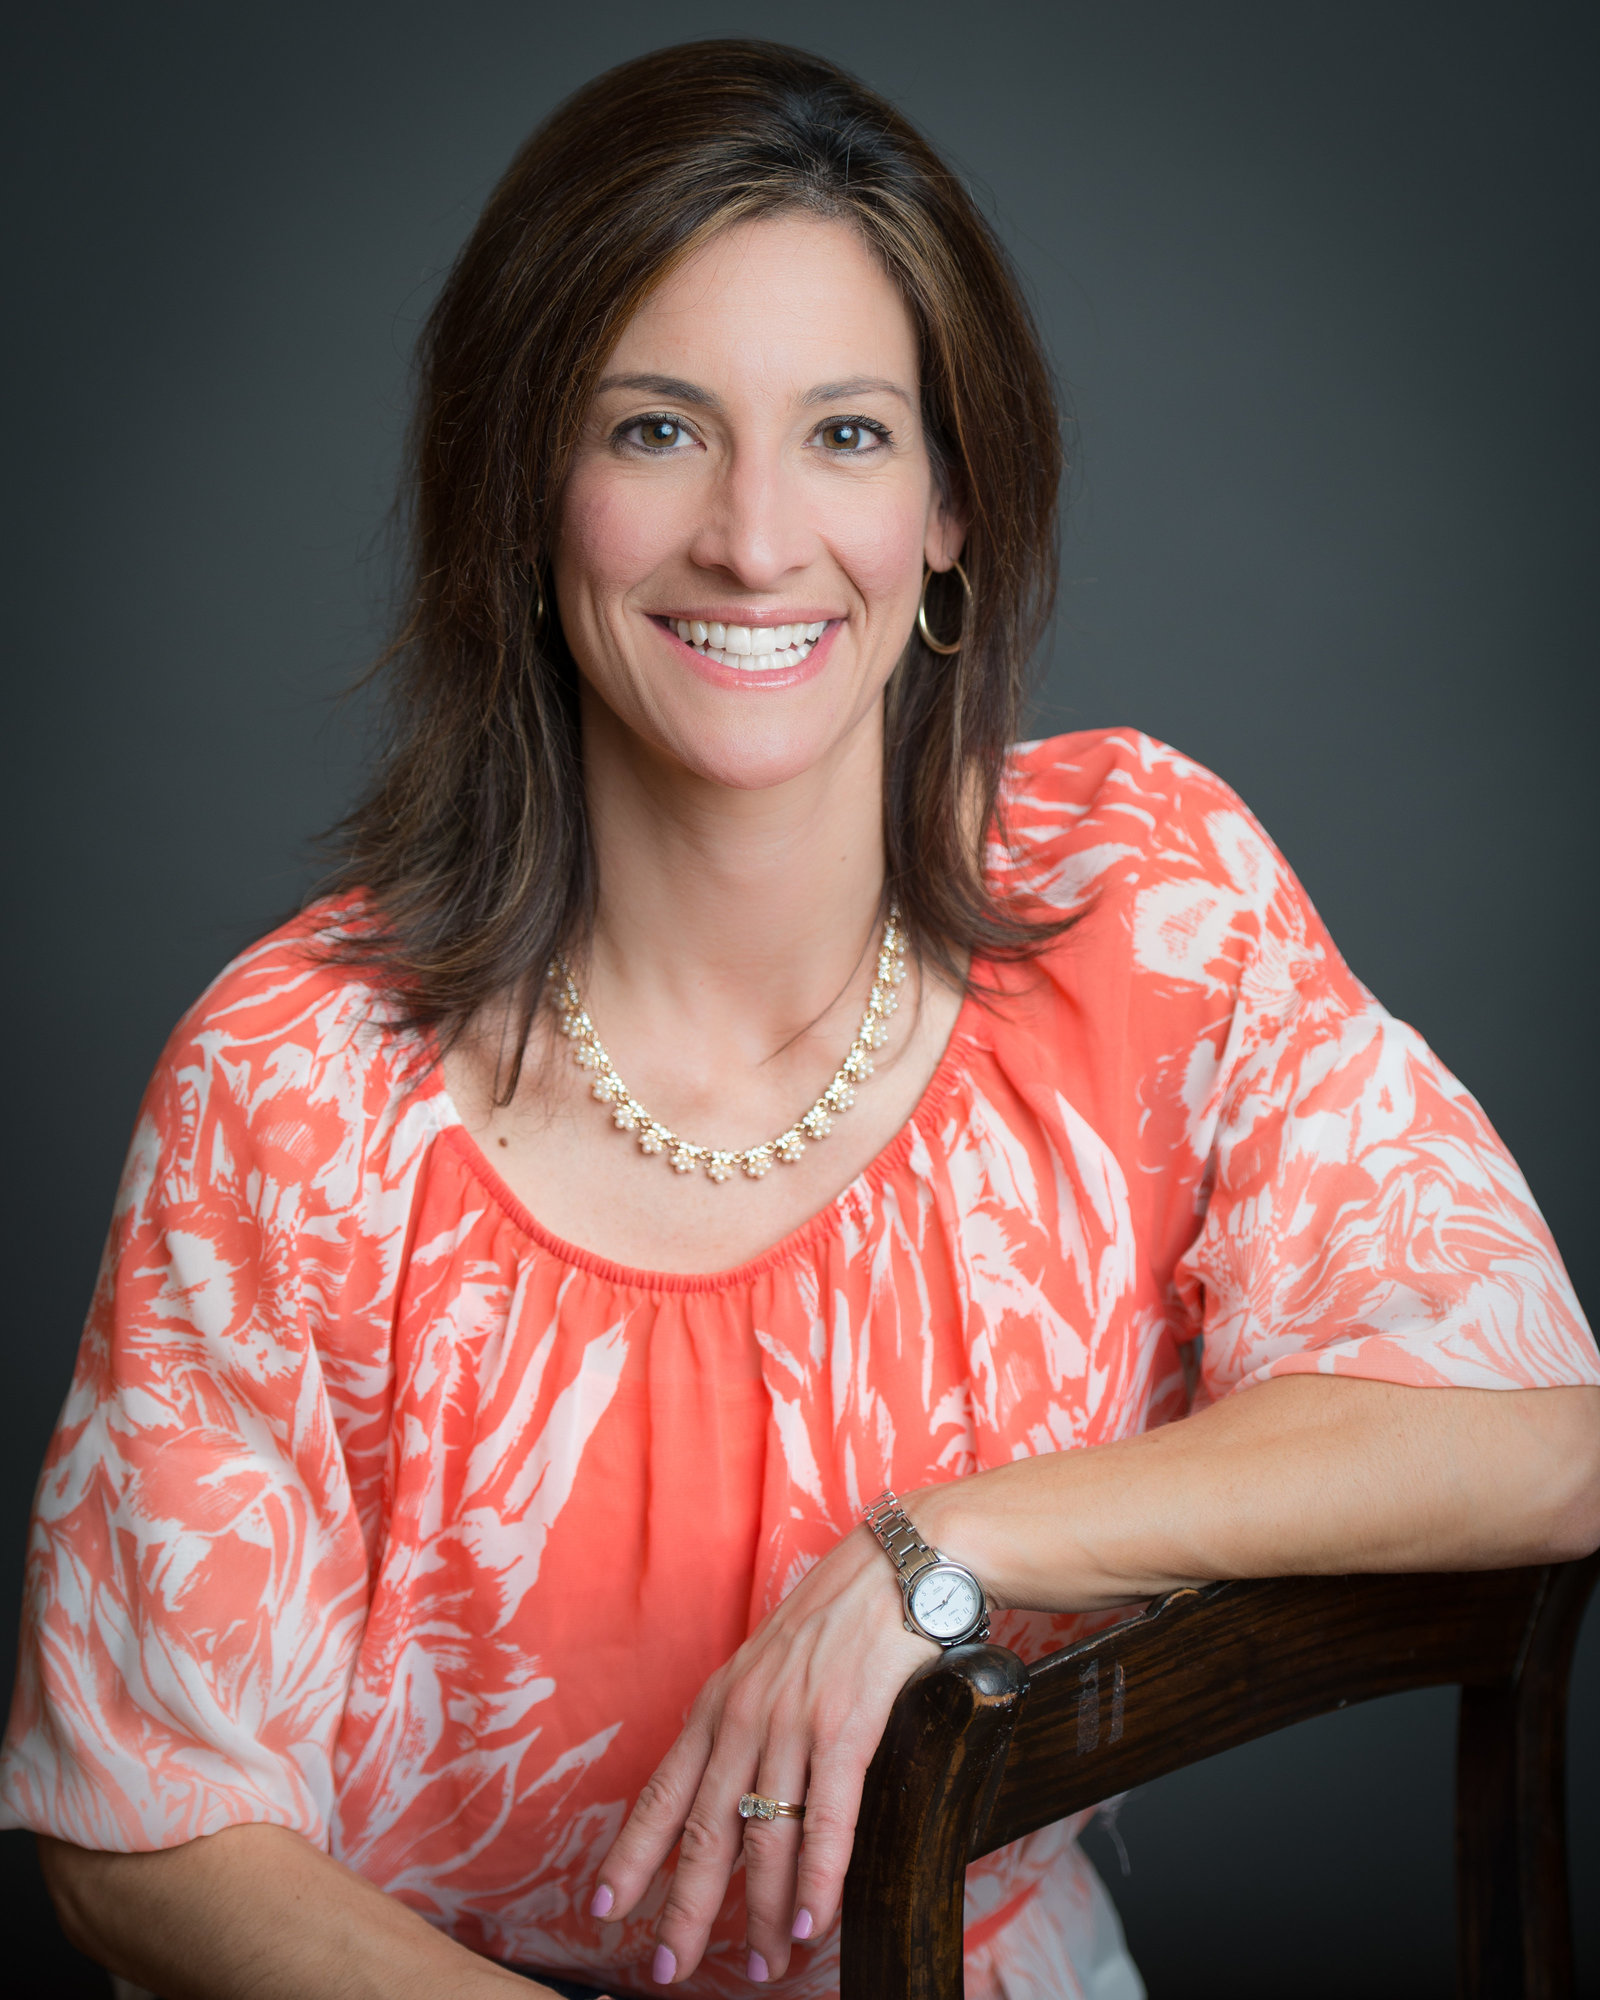 Corporate Headshot, West Chester PA Photographer, Headshot photographer, Dottie Foley Photography